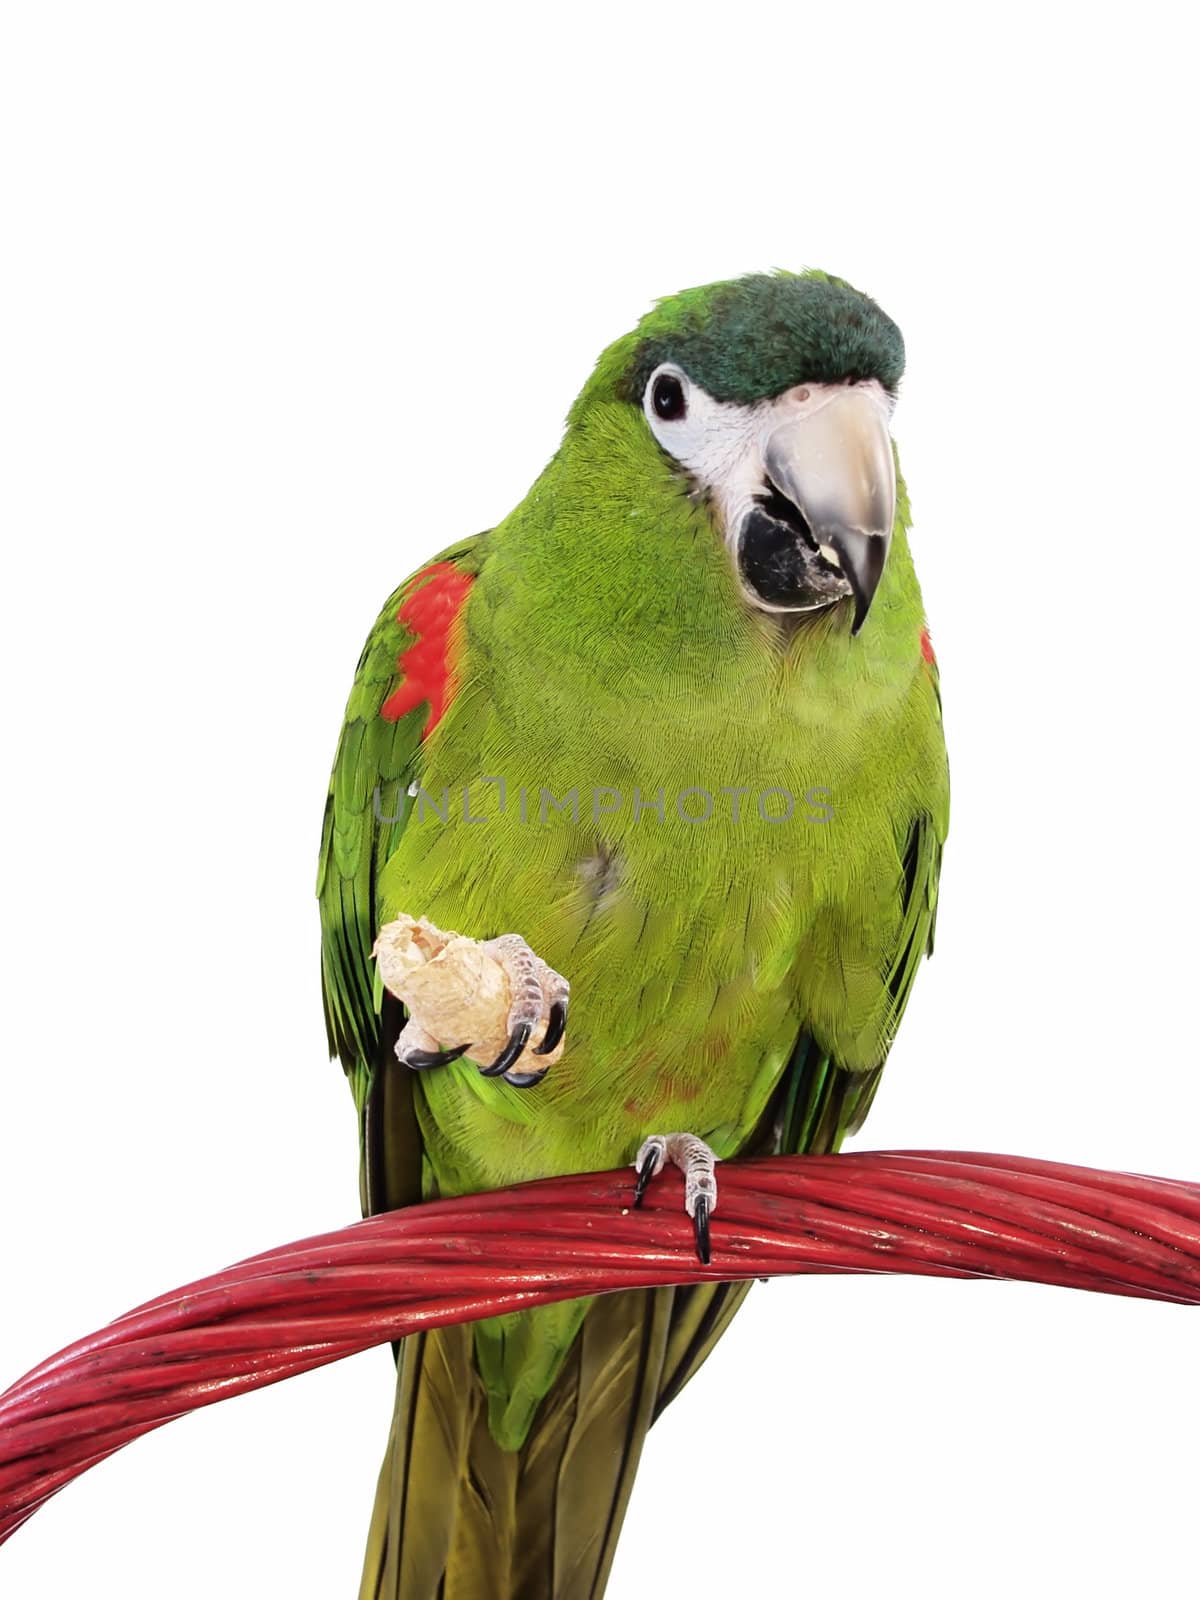 Miniature Noble Macaw on an isolated white background, eating a cracker.